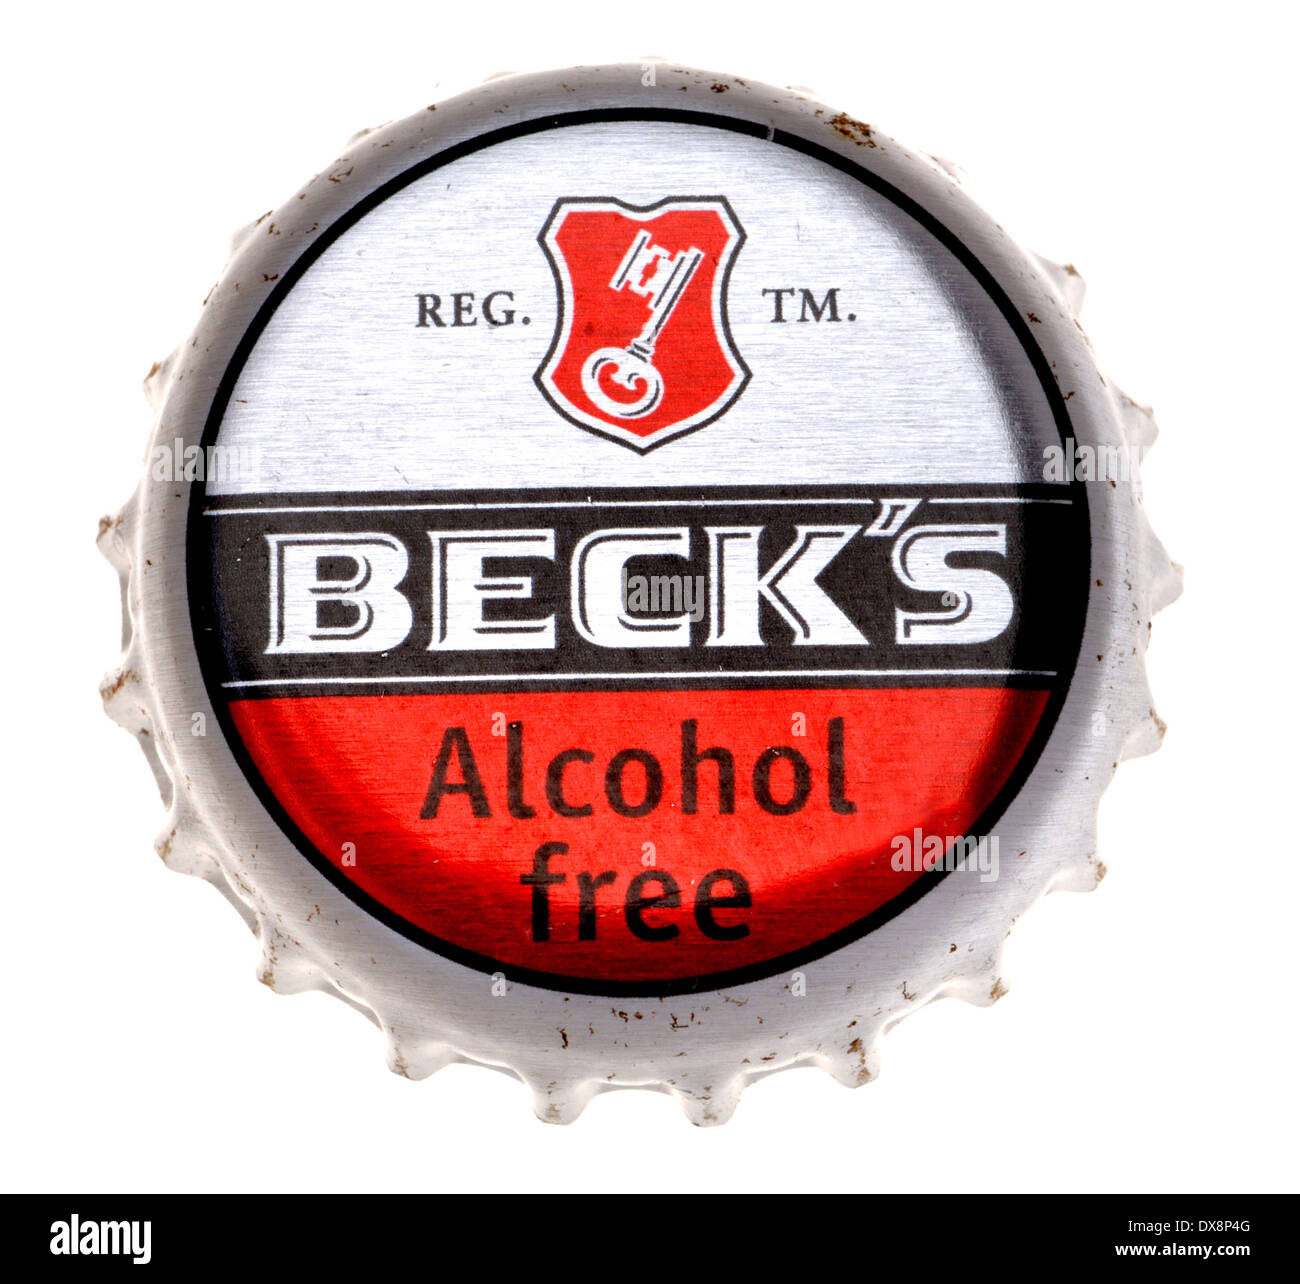 Beer bottle cap - Beck's Alcohol-free Stock Photo